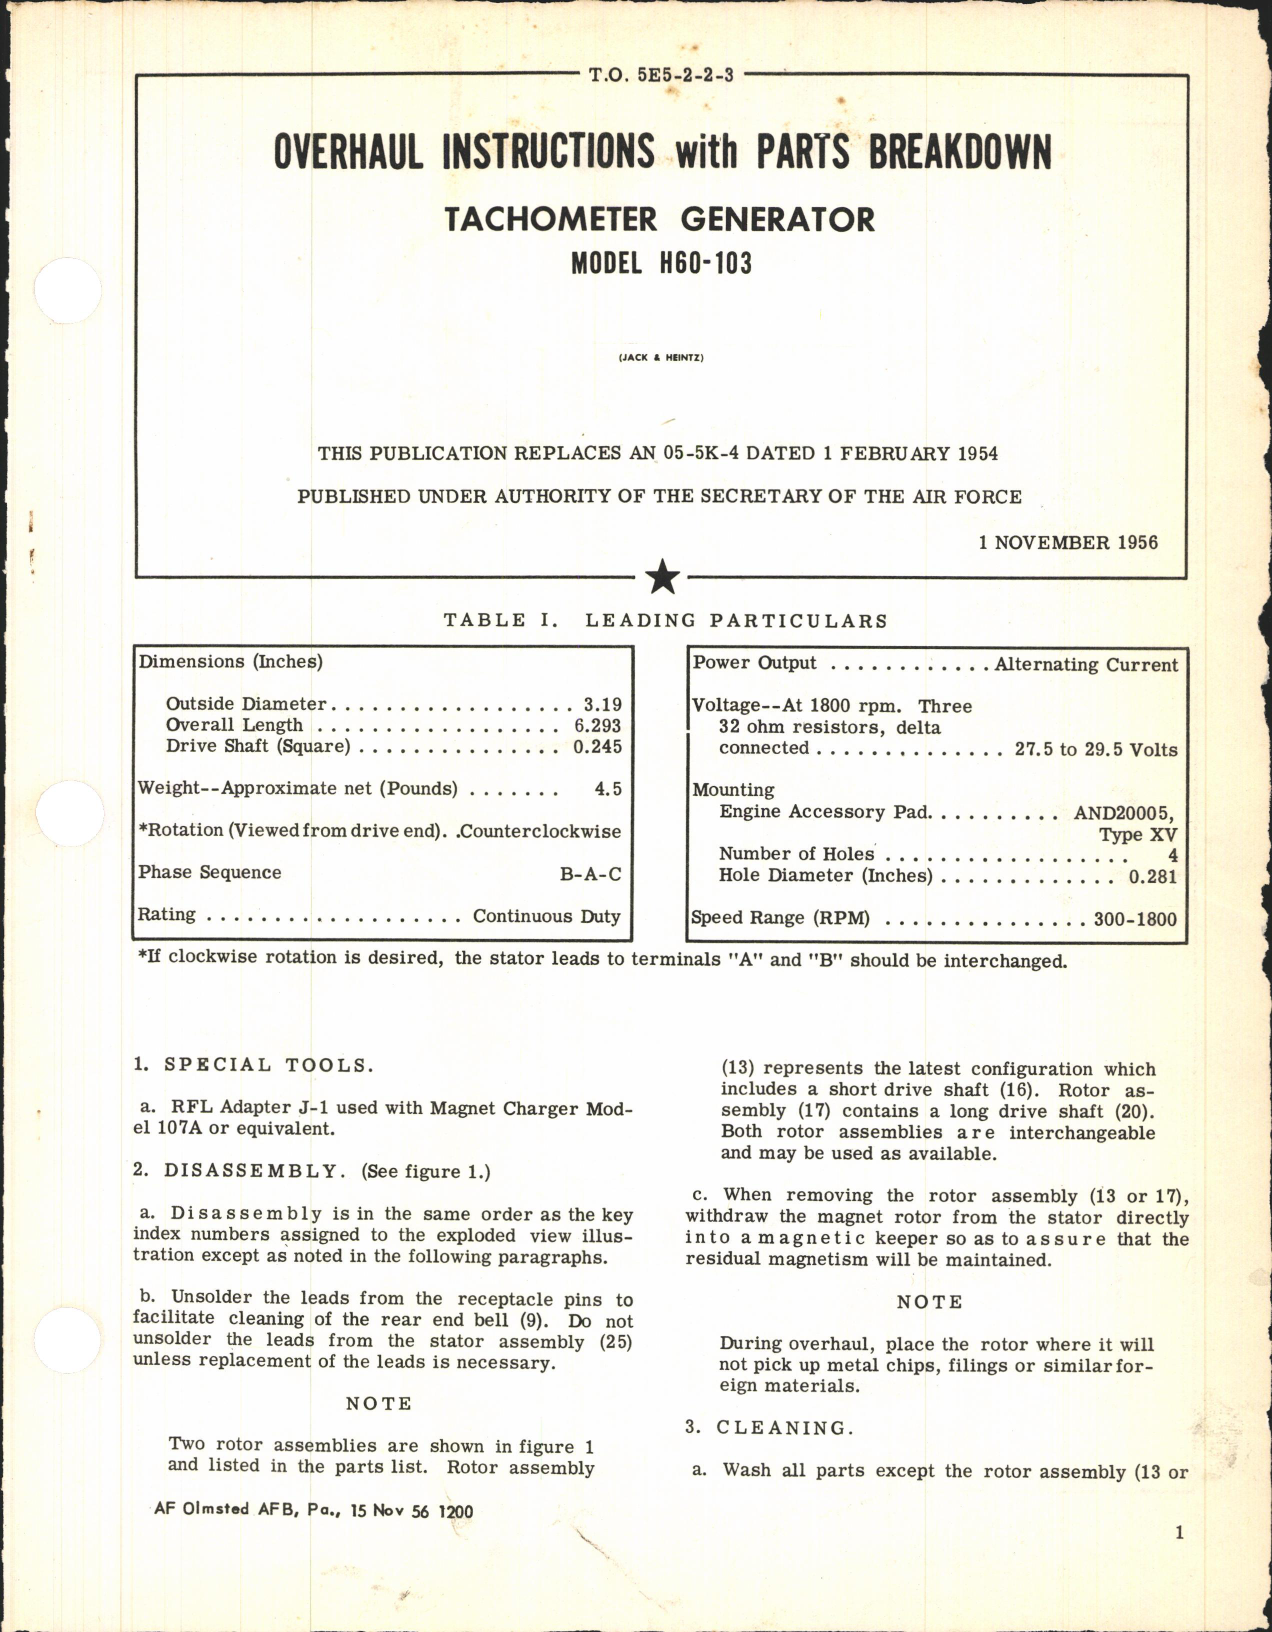 Sample page 1 from AirCorps Library document: Overhaul Instructions with Parts Breakdown for Tachometer Generator Model H60-103